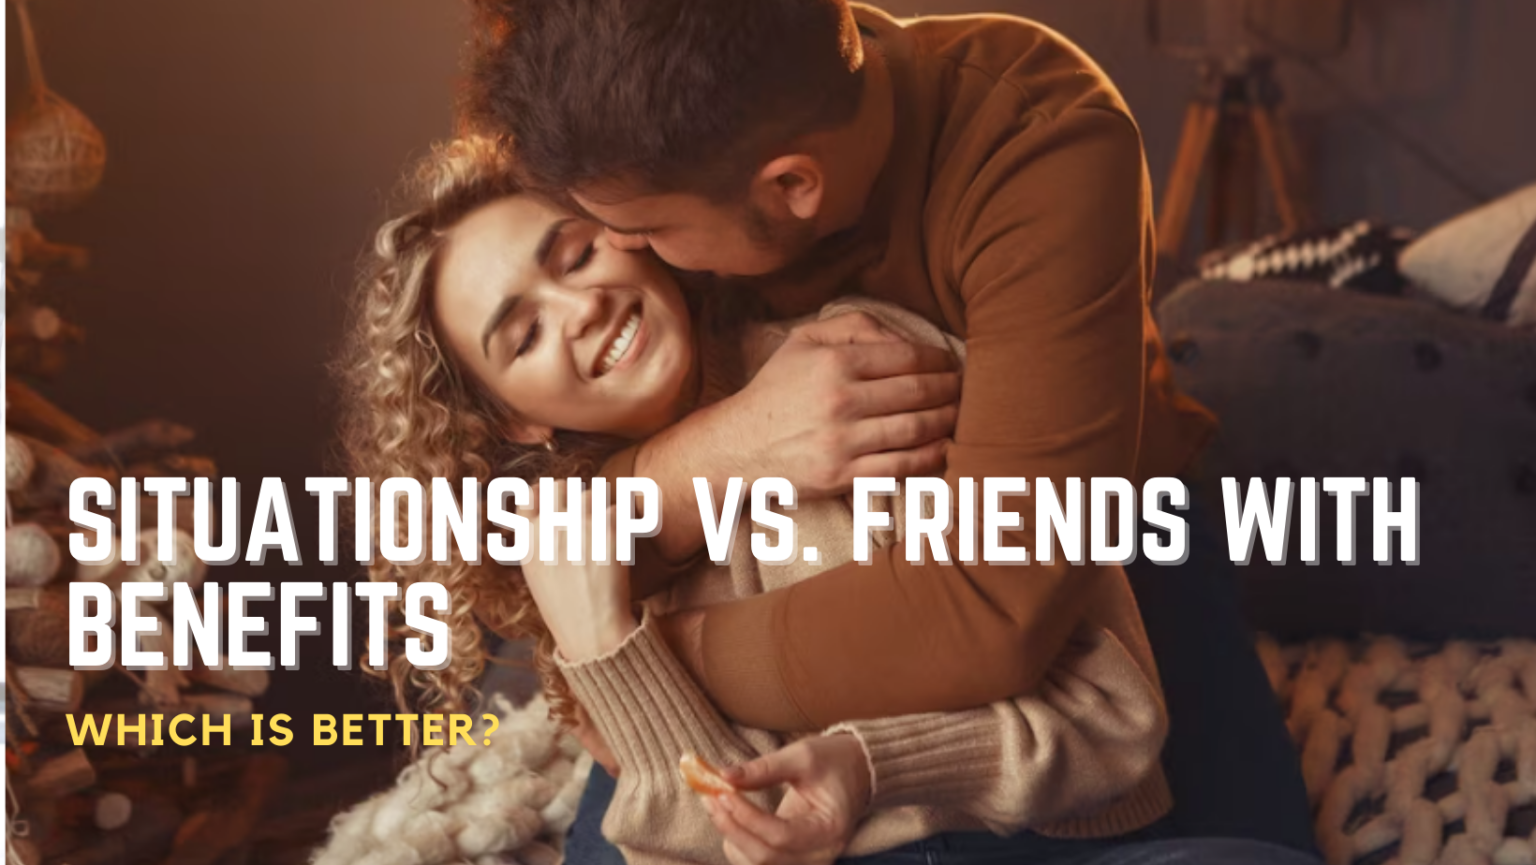 Situationship vs friends with benefits